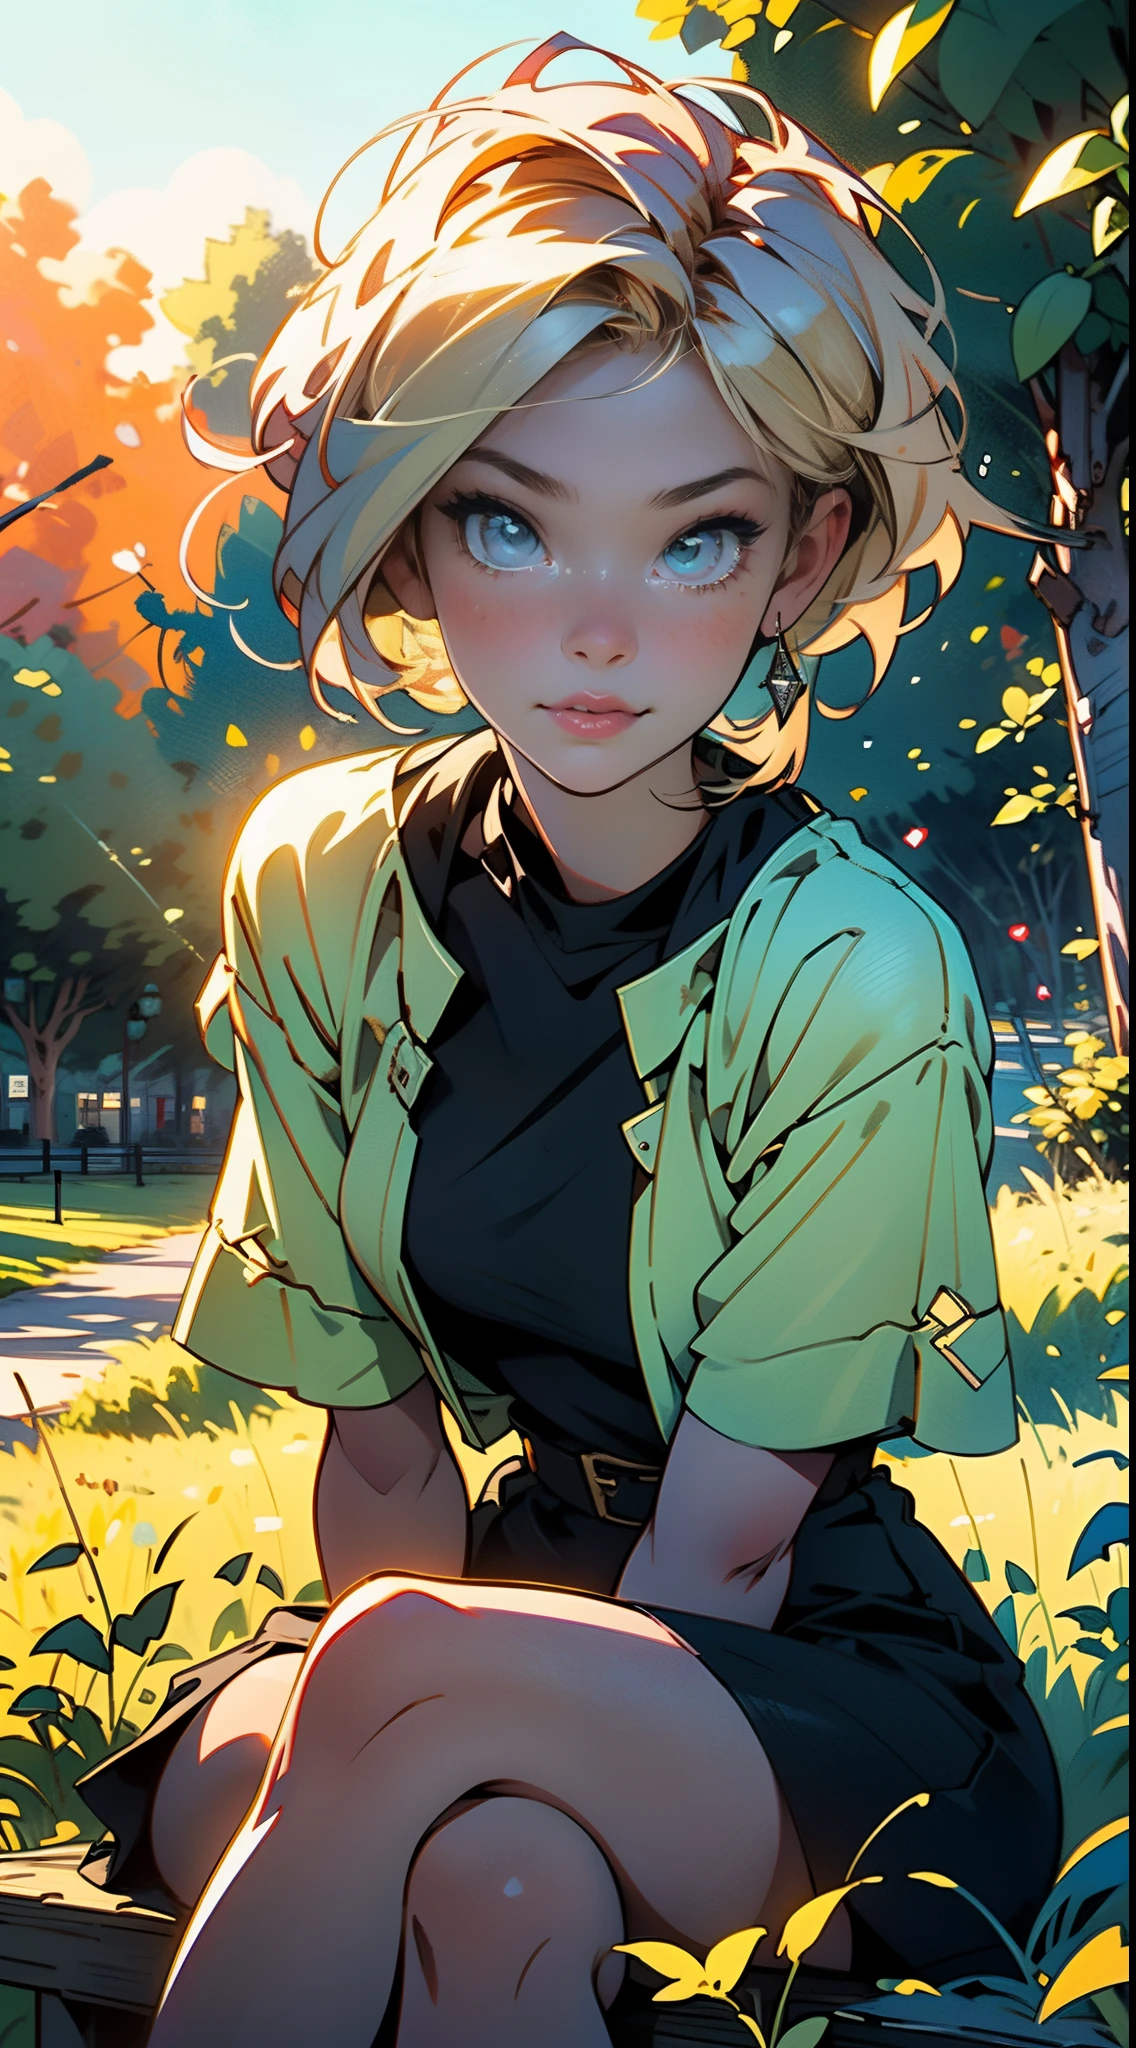 4K, high resolution, Best quality, Masterpiece, perfect, really warm colors, perfectly shaded, Perfect lighting, posted on e621, masterpiece, digital paint, (close up, Cute girl, 20 years old, blond short hair), sitting in the grass in a hide park in London. 1990s \(style\),